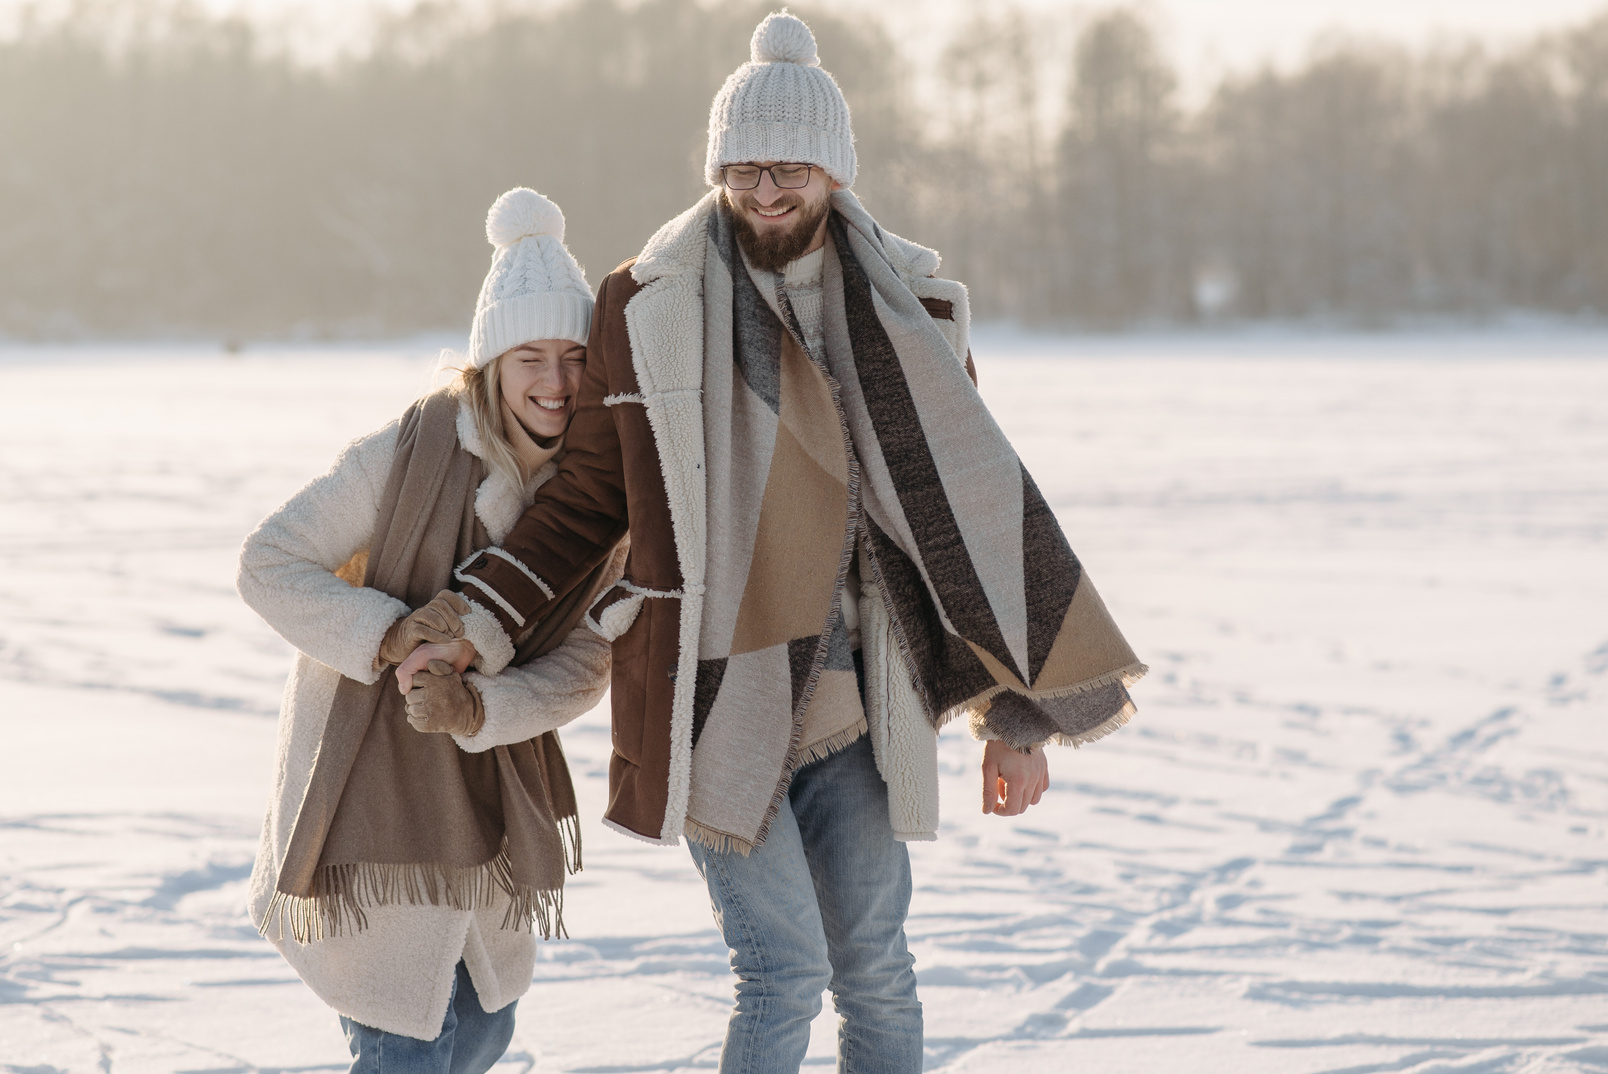 Cute Couple on a Snow Covered Ground 